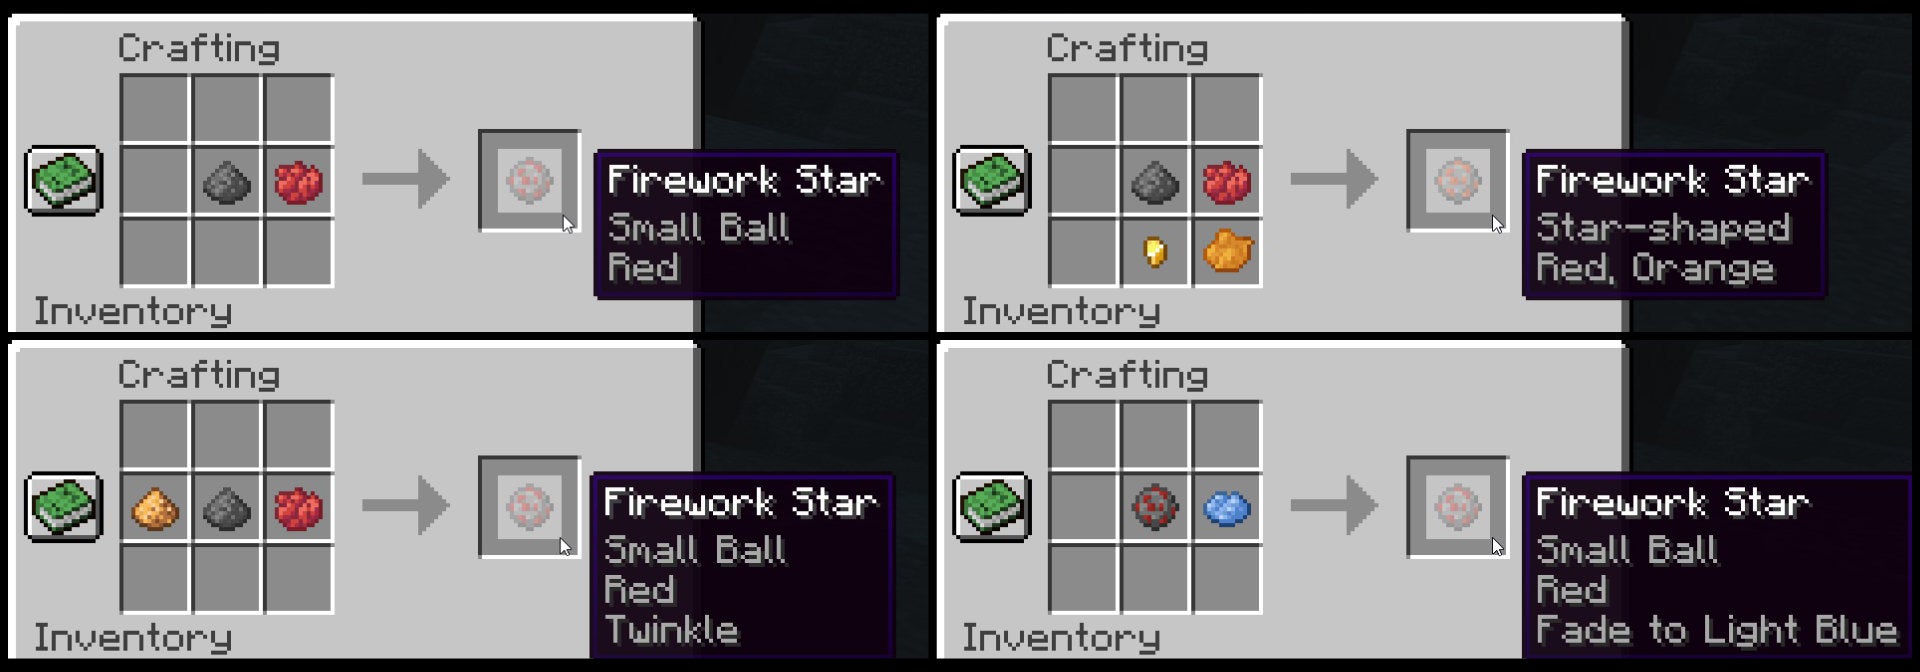 A composite image of four types of Firework Star being created in four different crafting windows in Minecraft.